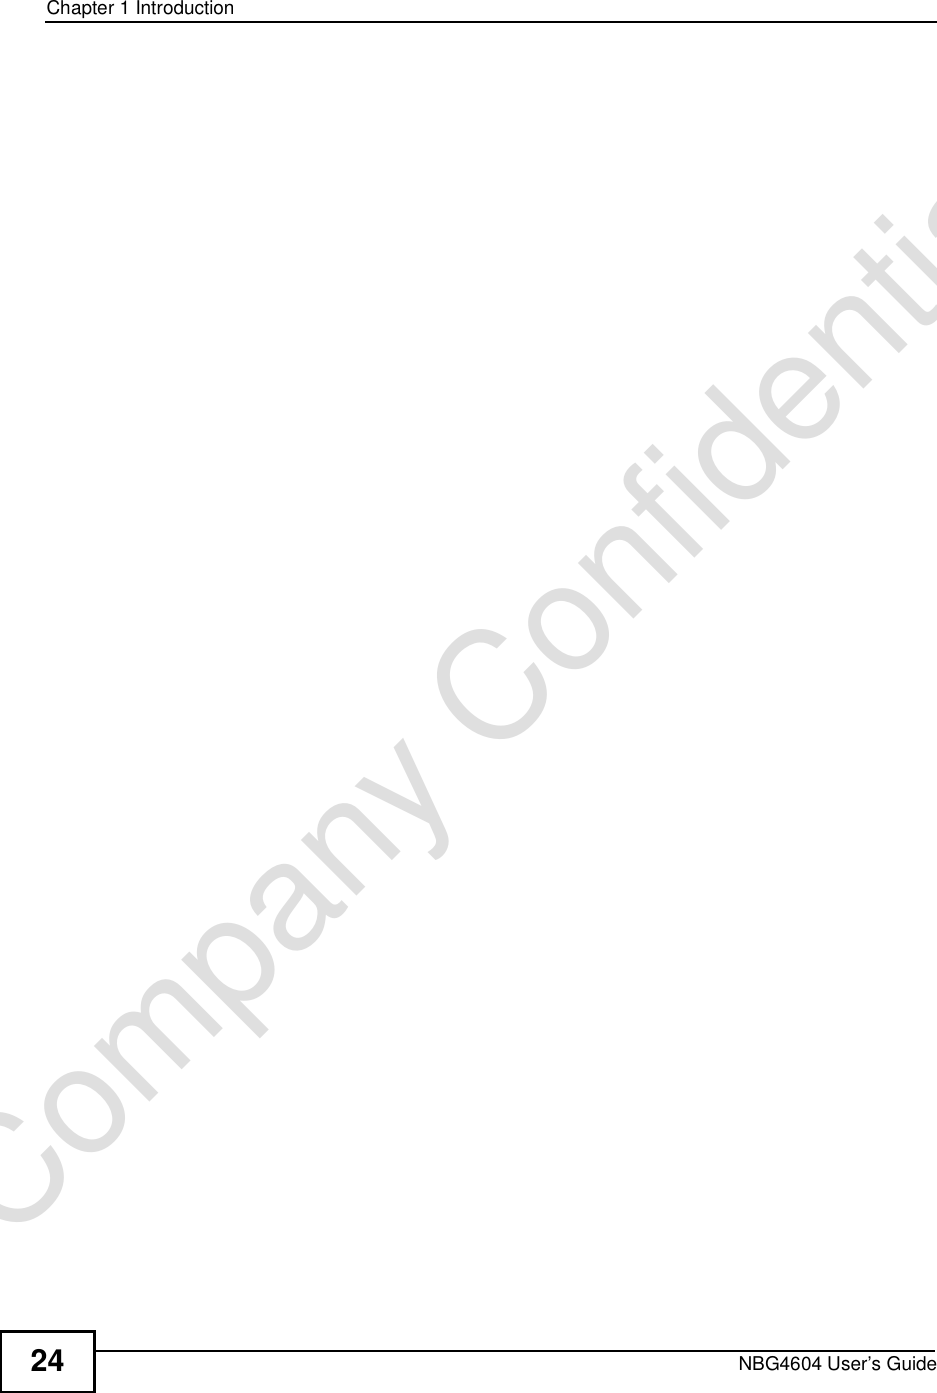 Chapter 1IntroductionNBG4604 User’s Guide24Company Confidential